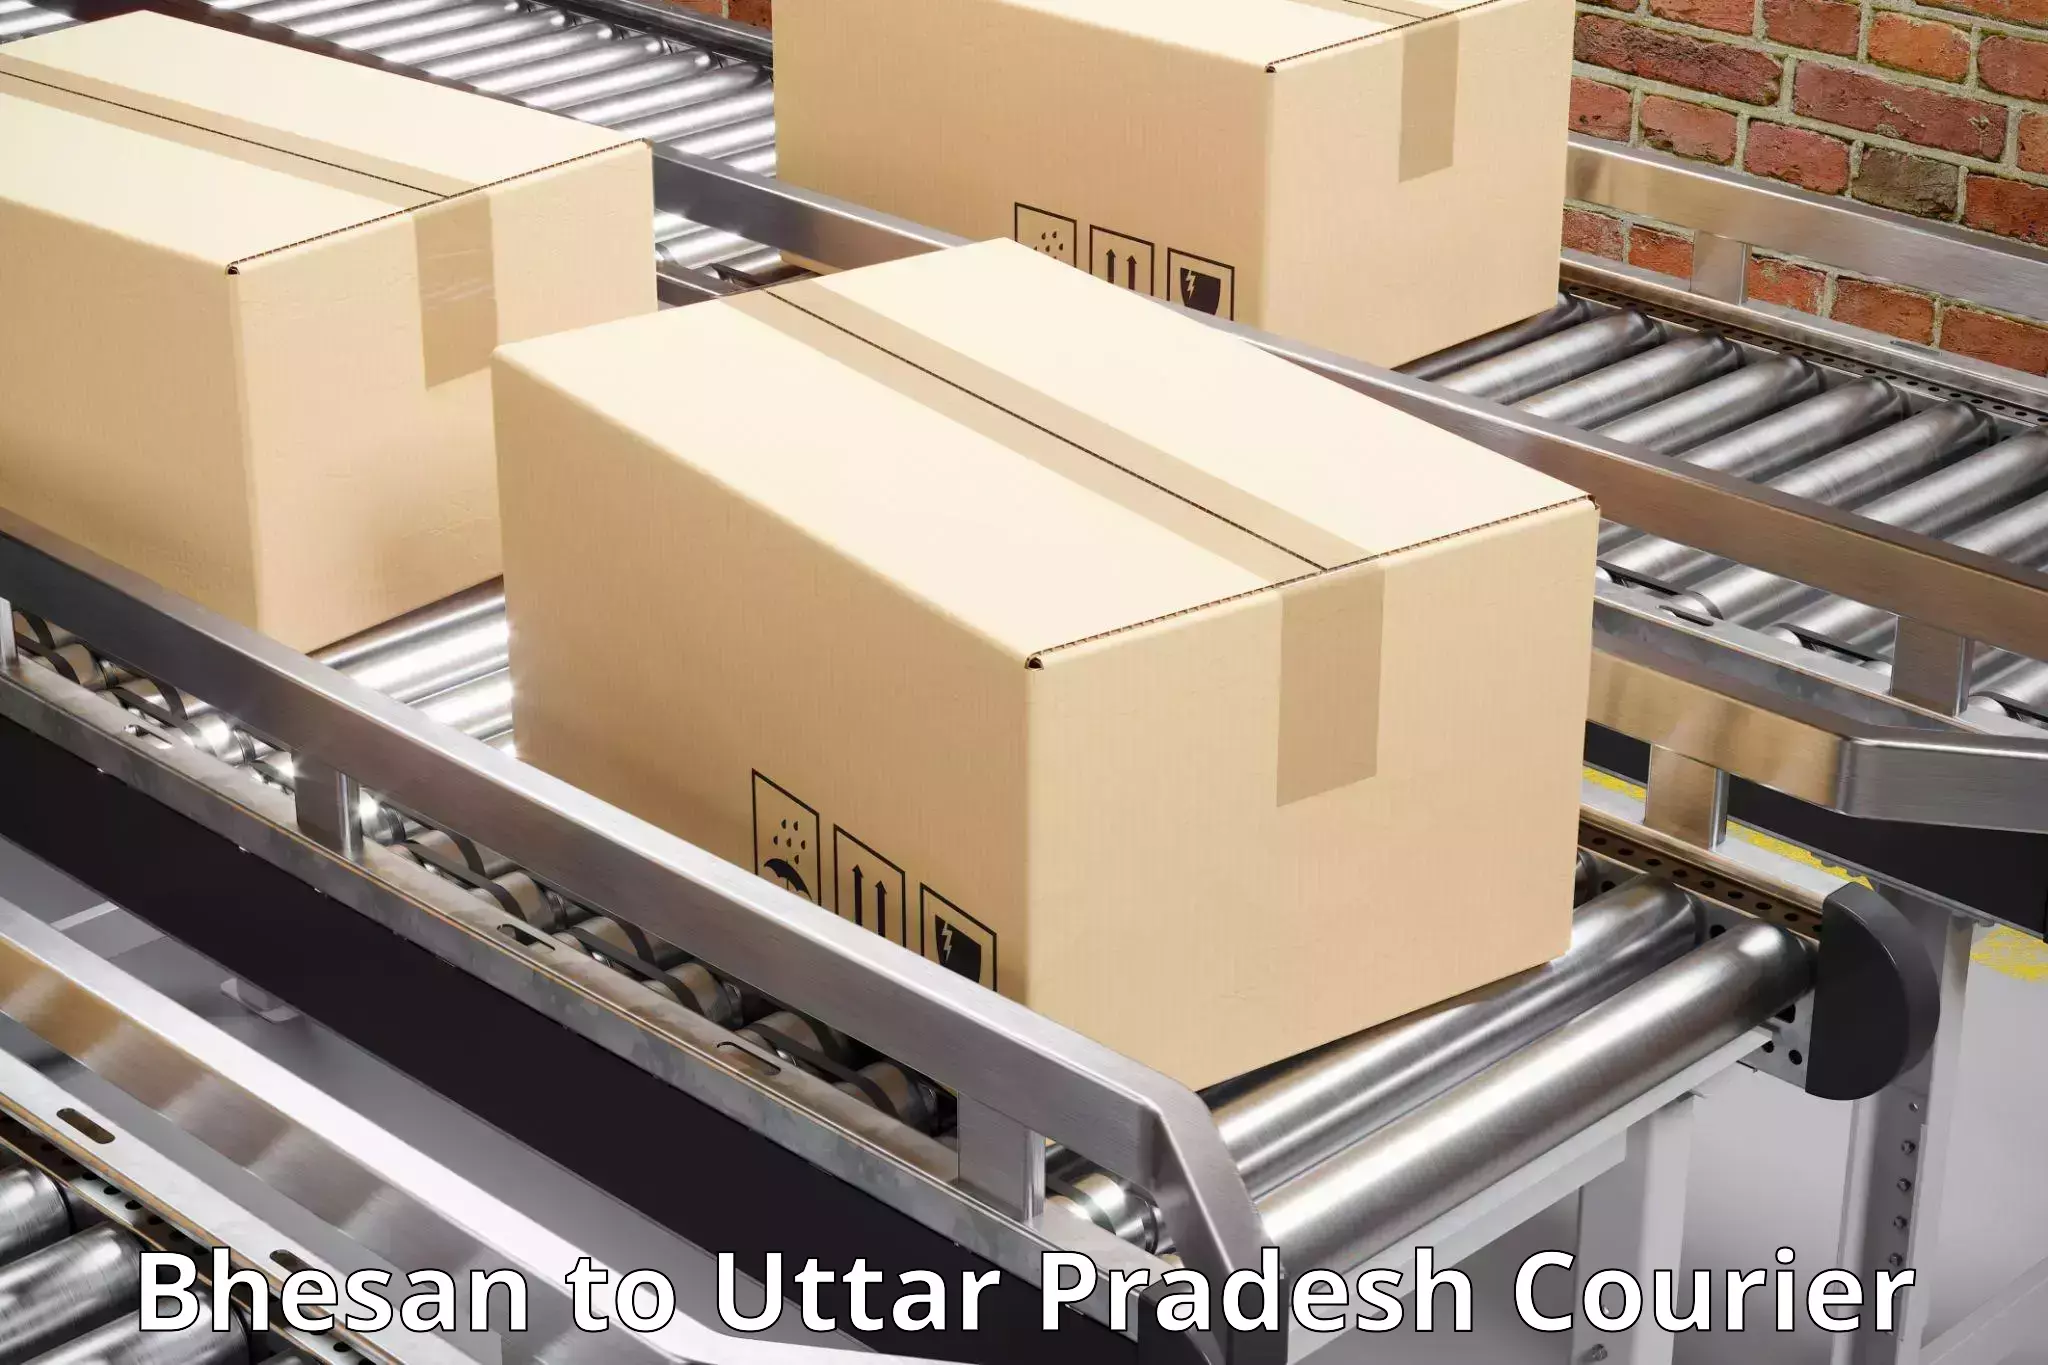 Cost-effective courier solutions Bhesan to Agra